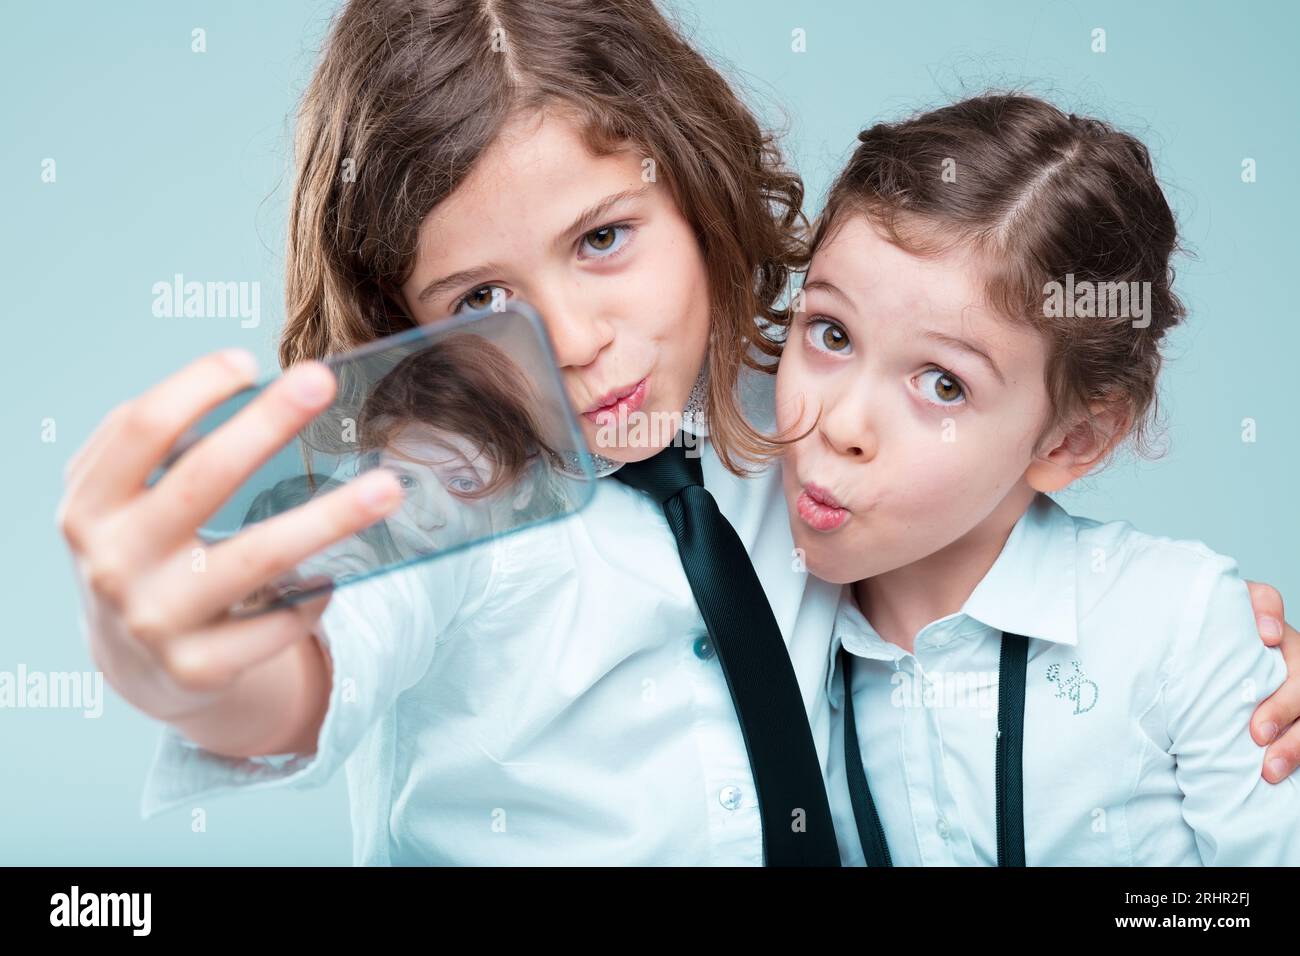 Two trendy girls take selfies, dressed in formal business attire, using advanced smartphones, emphasizing their image on social platforms Stock Photo